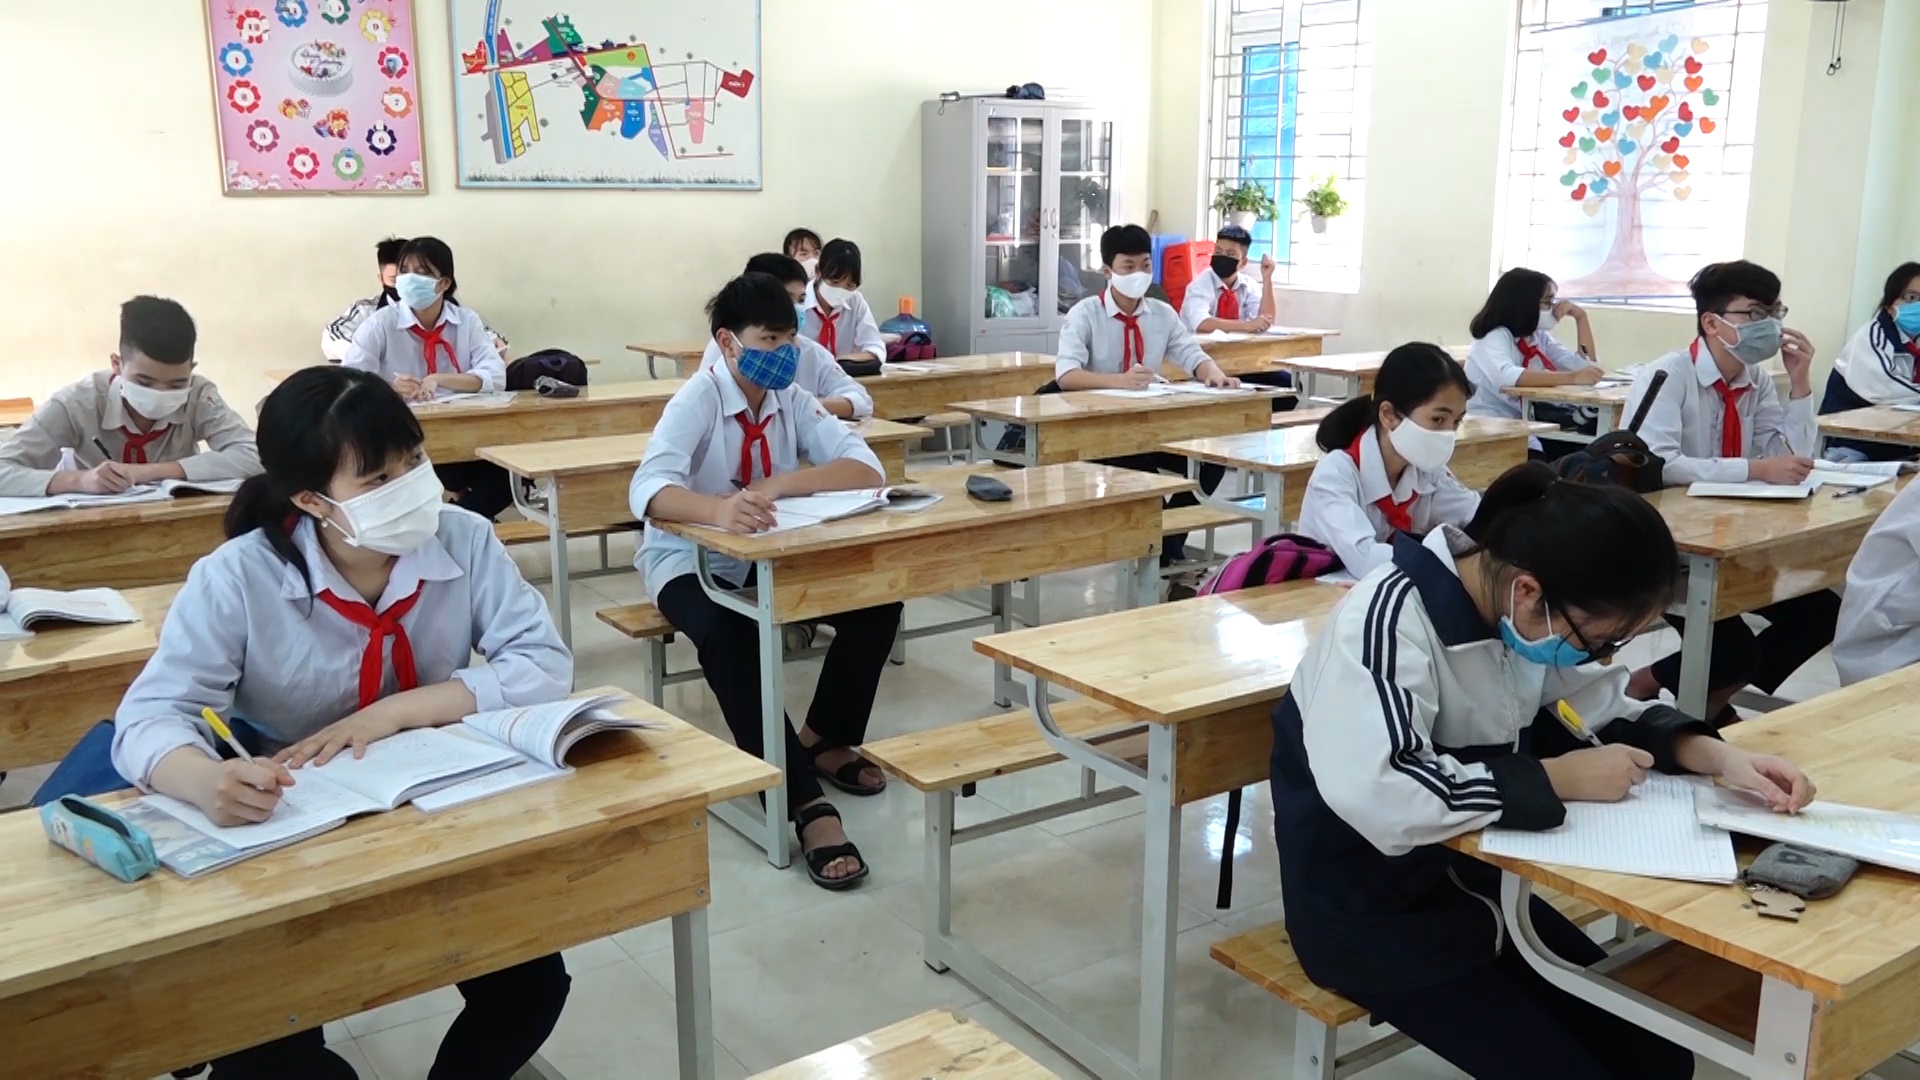 Students sitting at desks with masks on